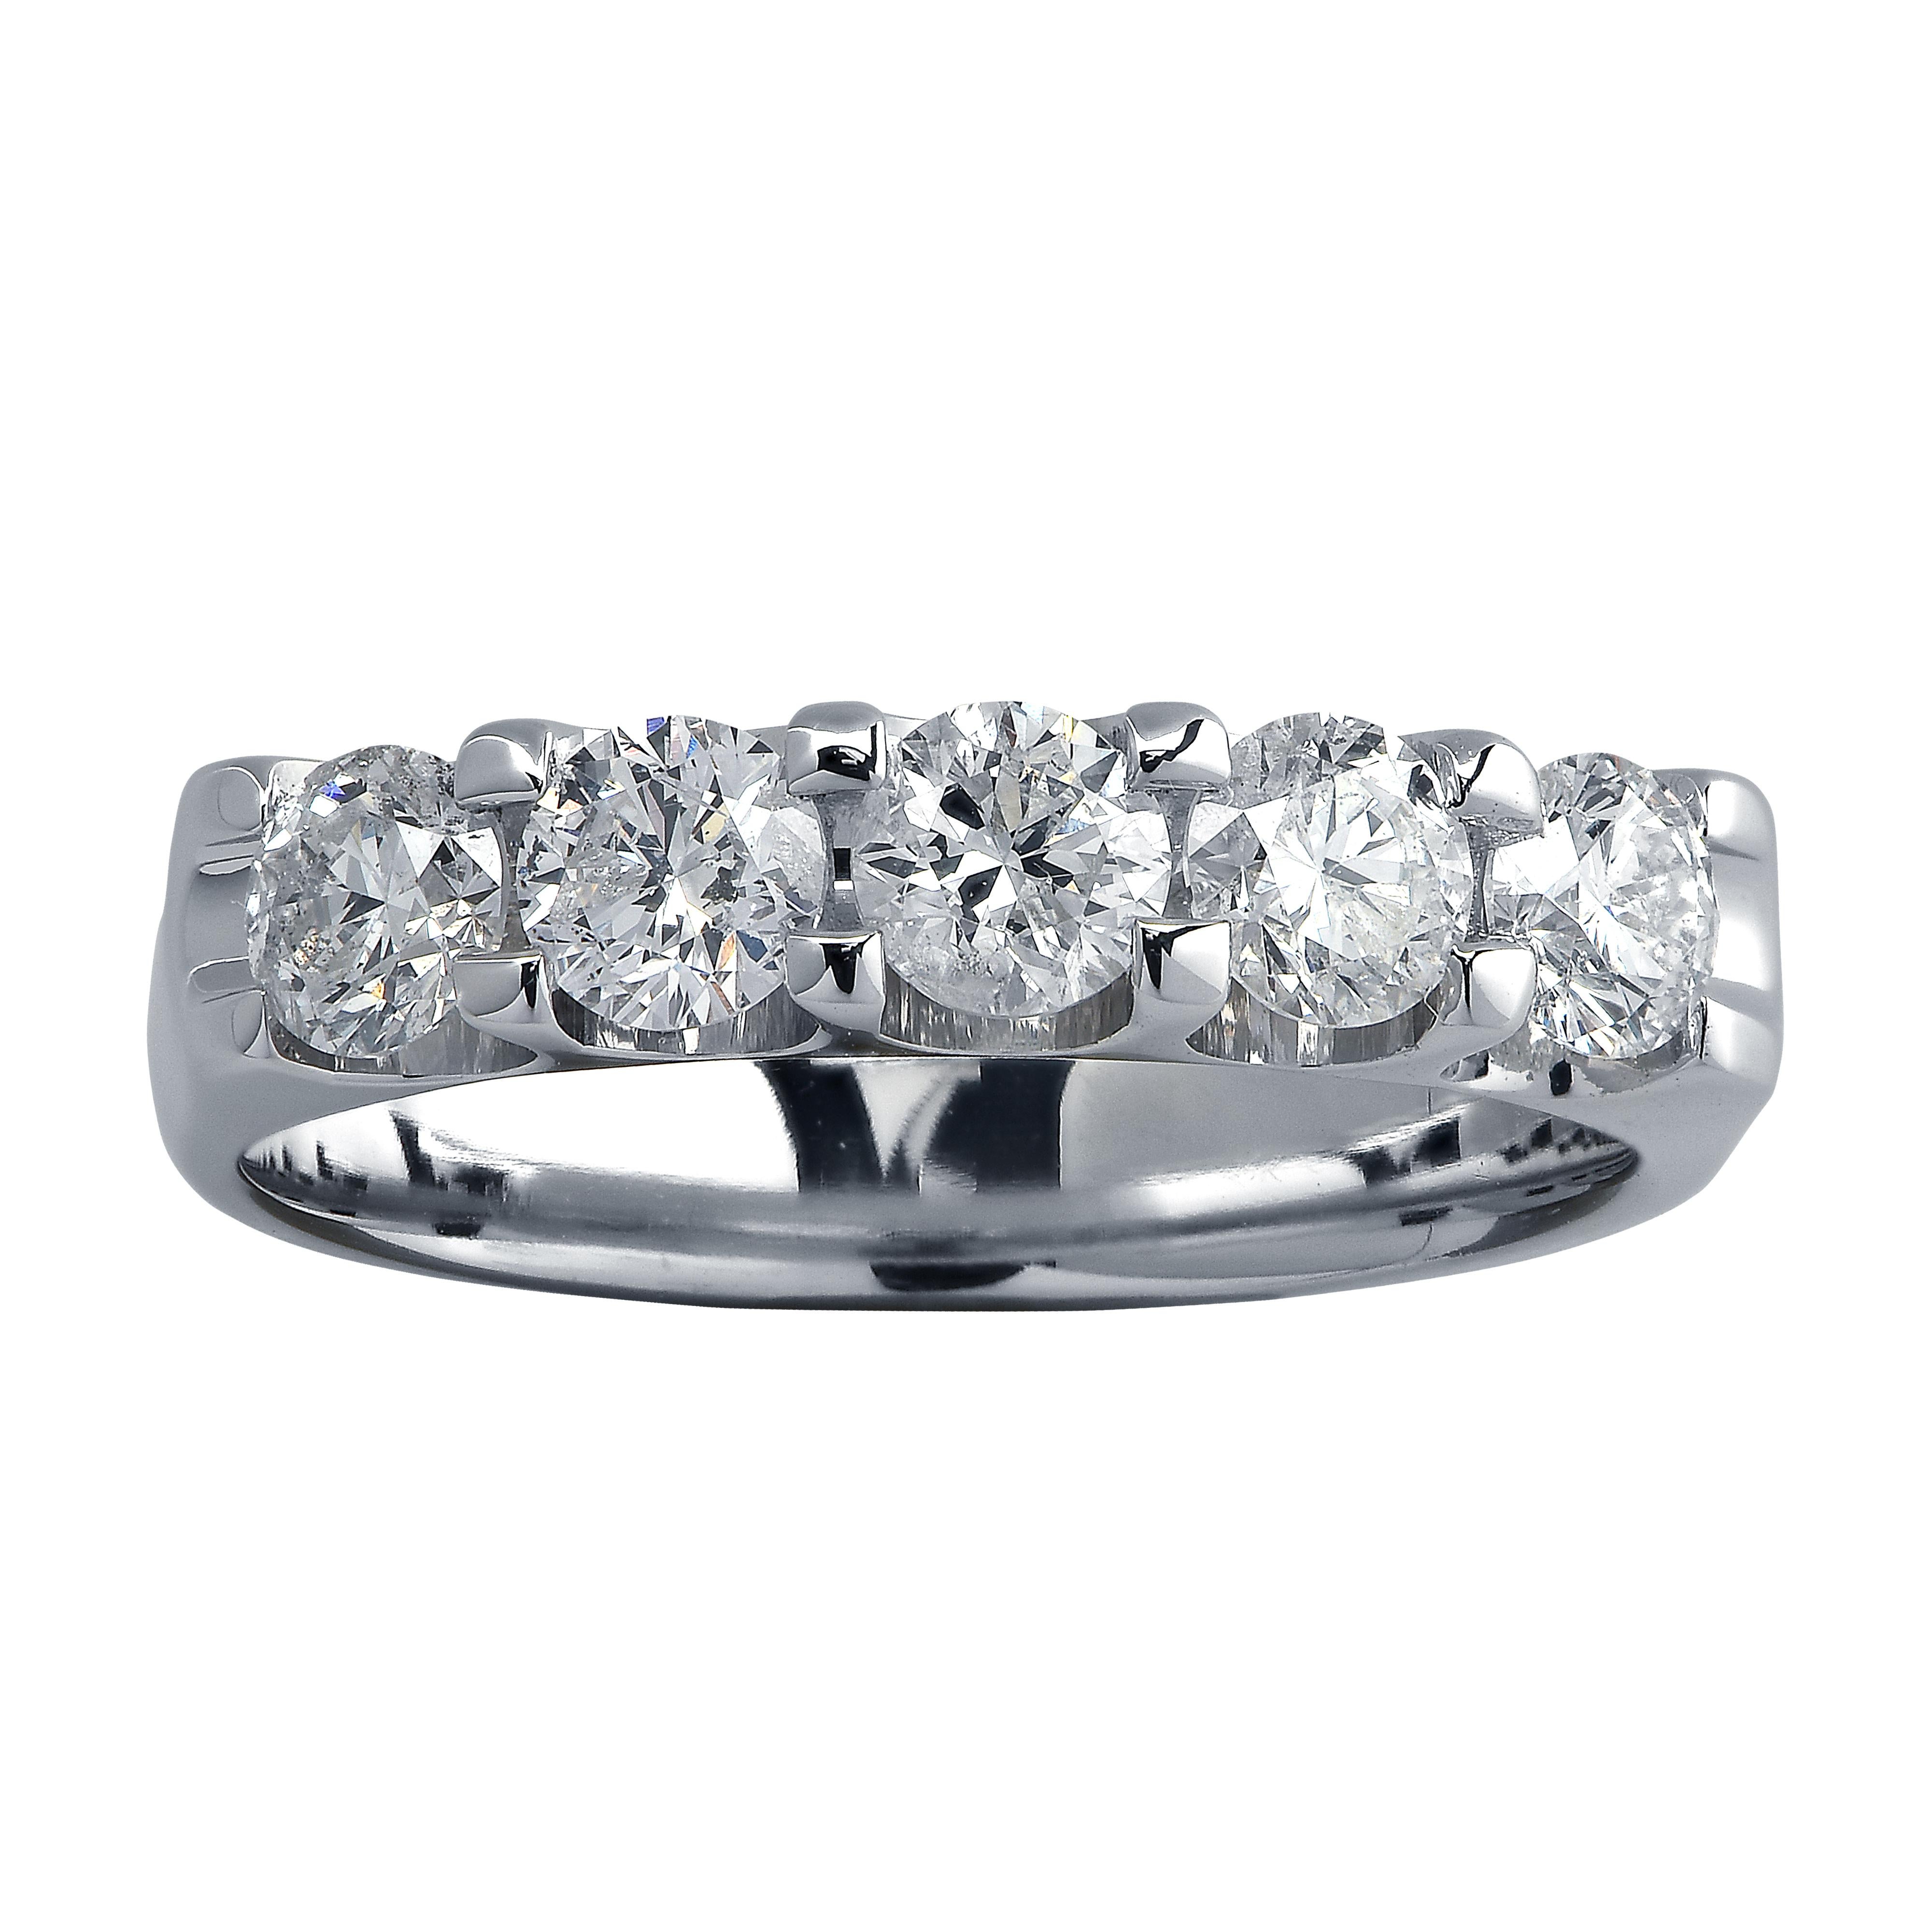 Stunning diamond band crafted in white gold featuring 5 round brilliant cut diamonds weighing approximately .75 carats total, G color SI2-3 clarity. This timelessly elegant ring is a size 4.25 and measures 3.8 mm in width.

Our pieces are all